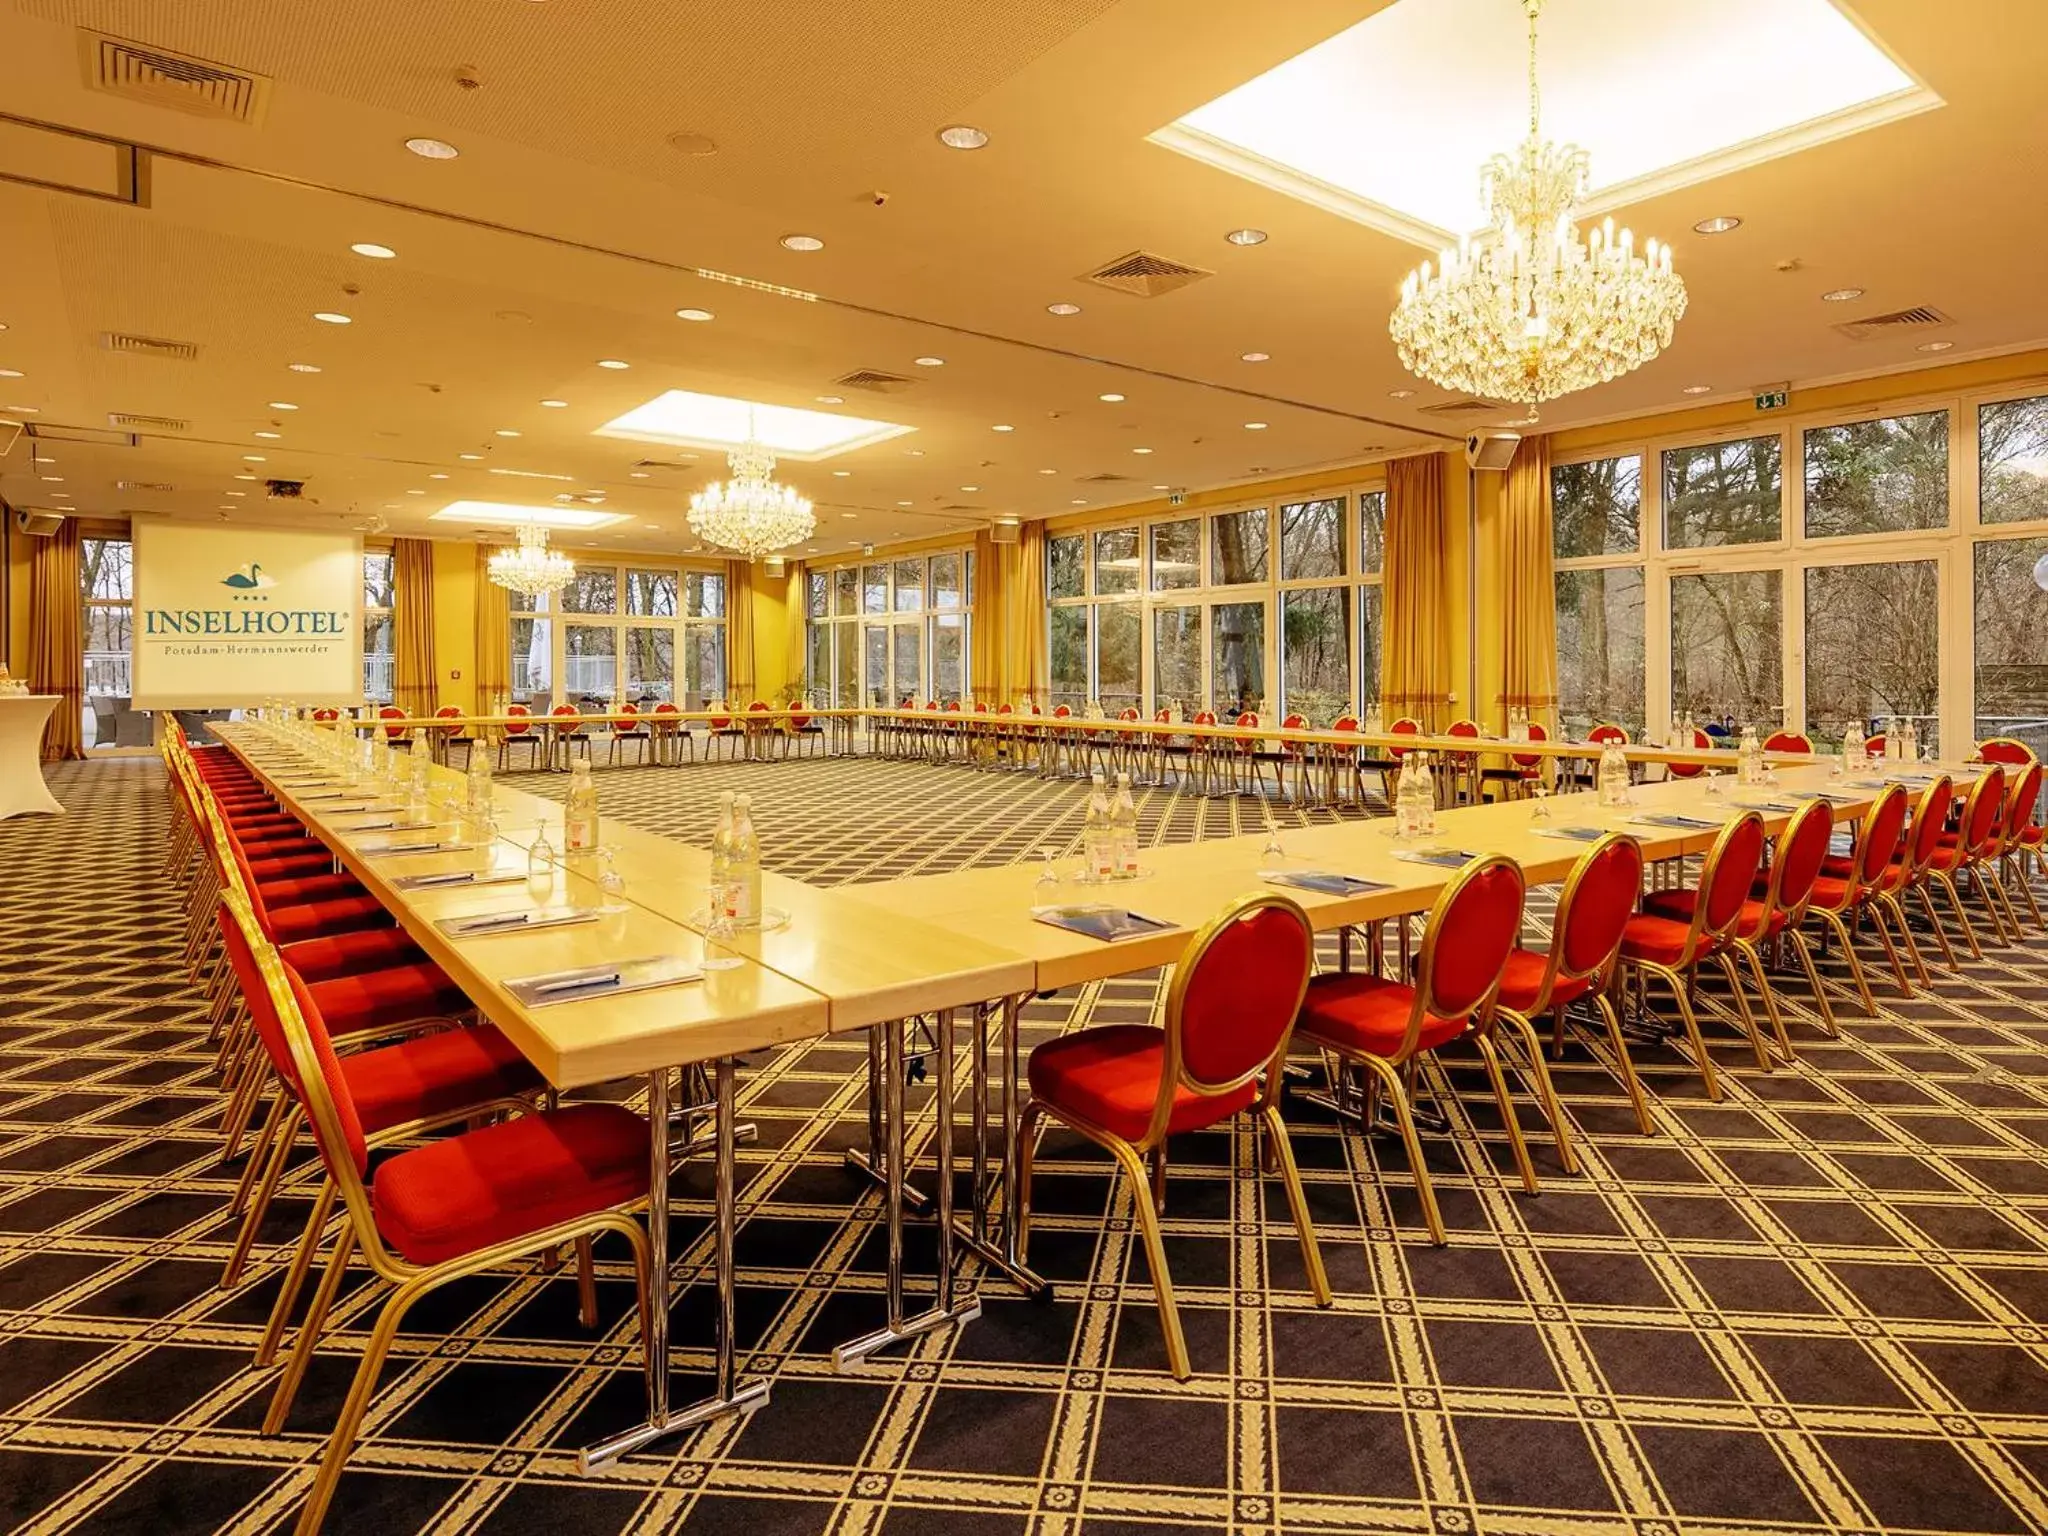 Meeting/conference room, Banquet Facilities in INSELHOTEL Potsdam